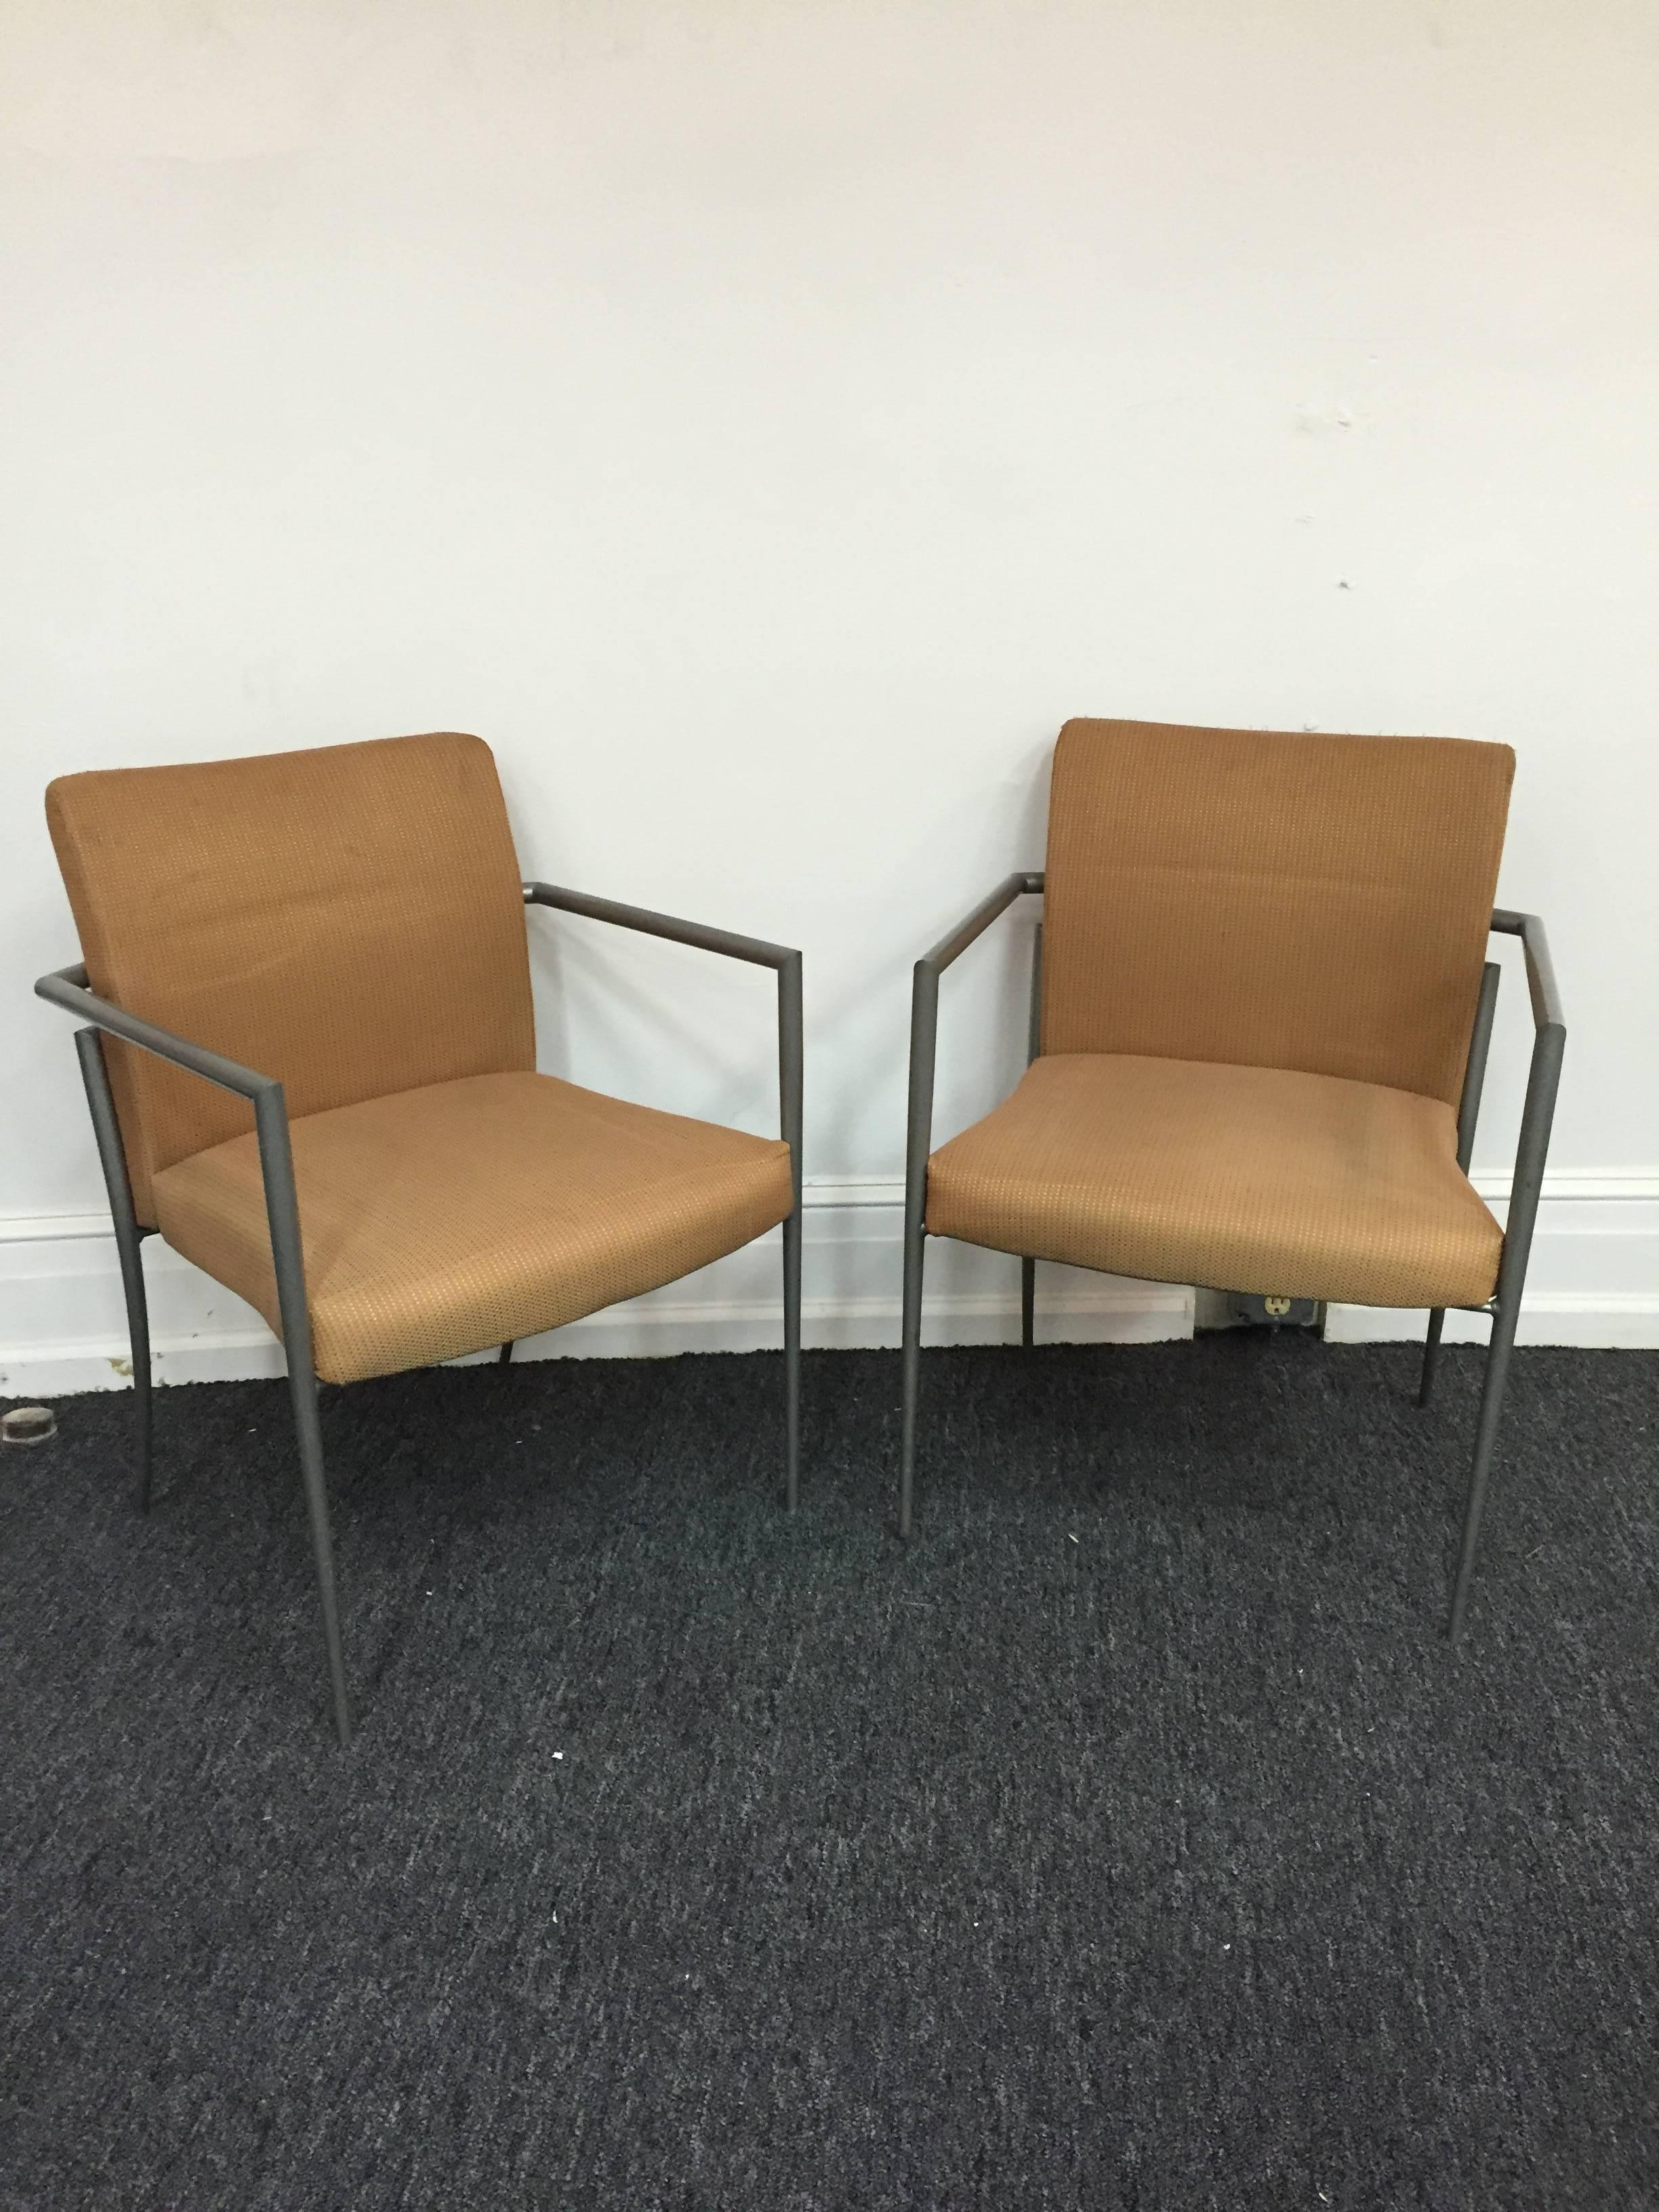 A pair Italian Gio Ponti style chairs with sleek design and tapered legs.